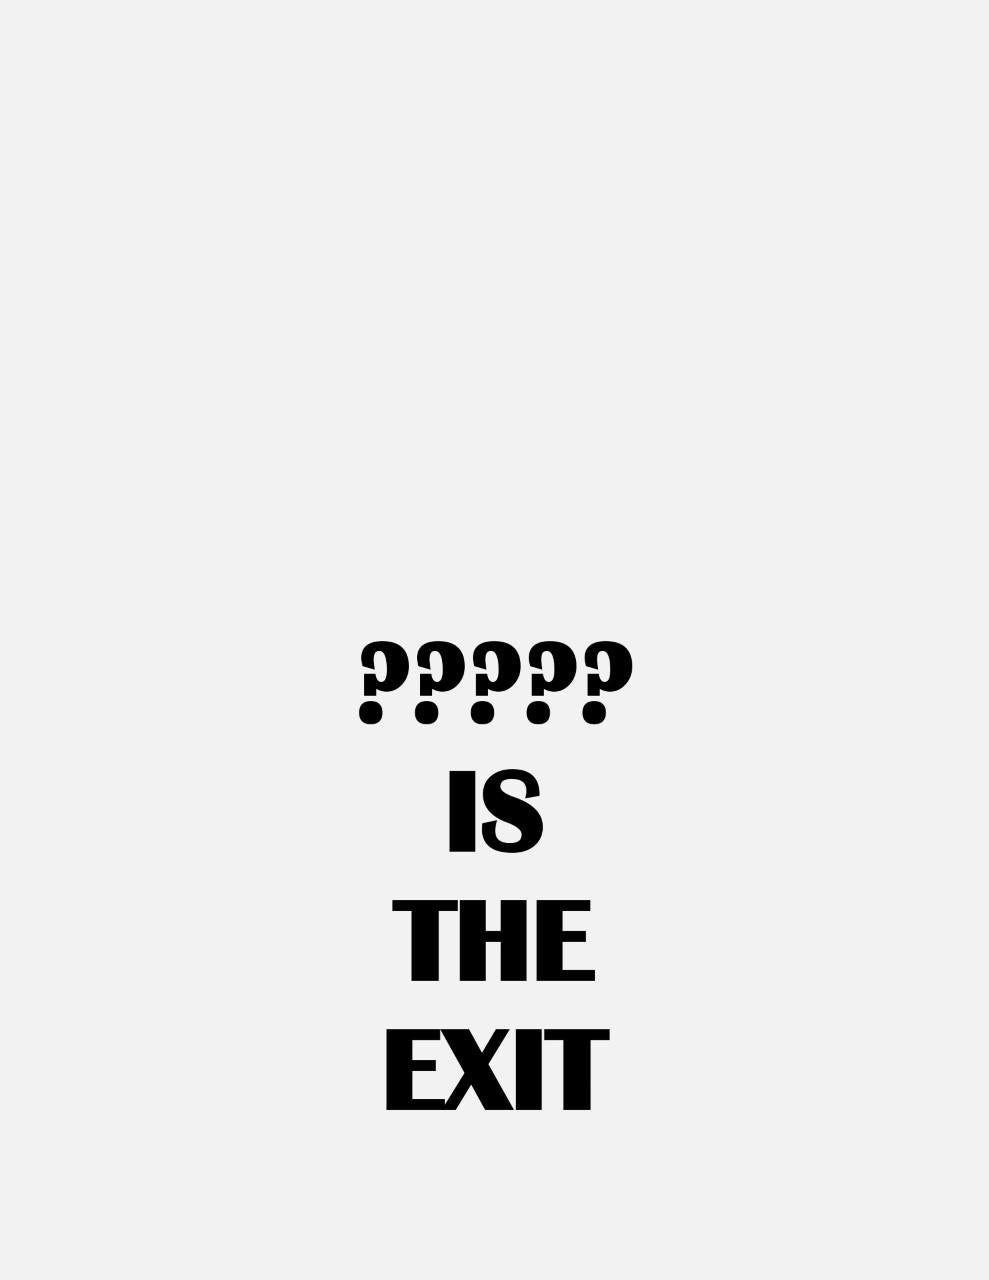 PLAYLIST WHERE IS THE EXIT